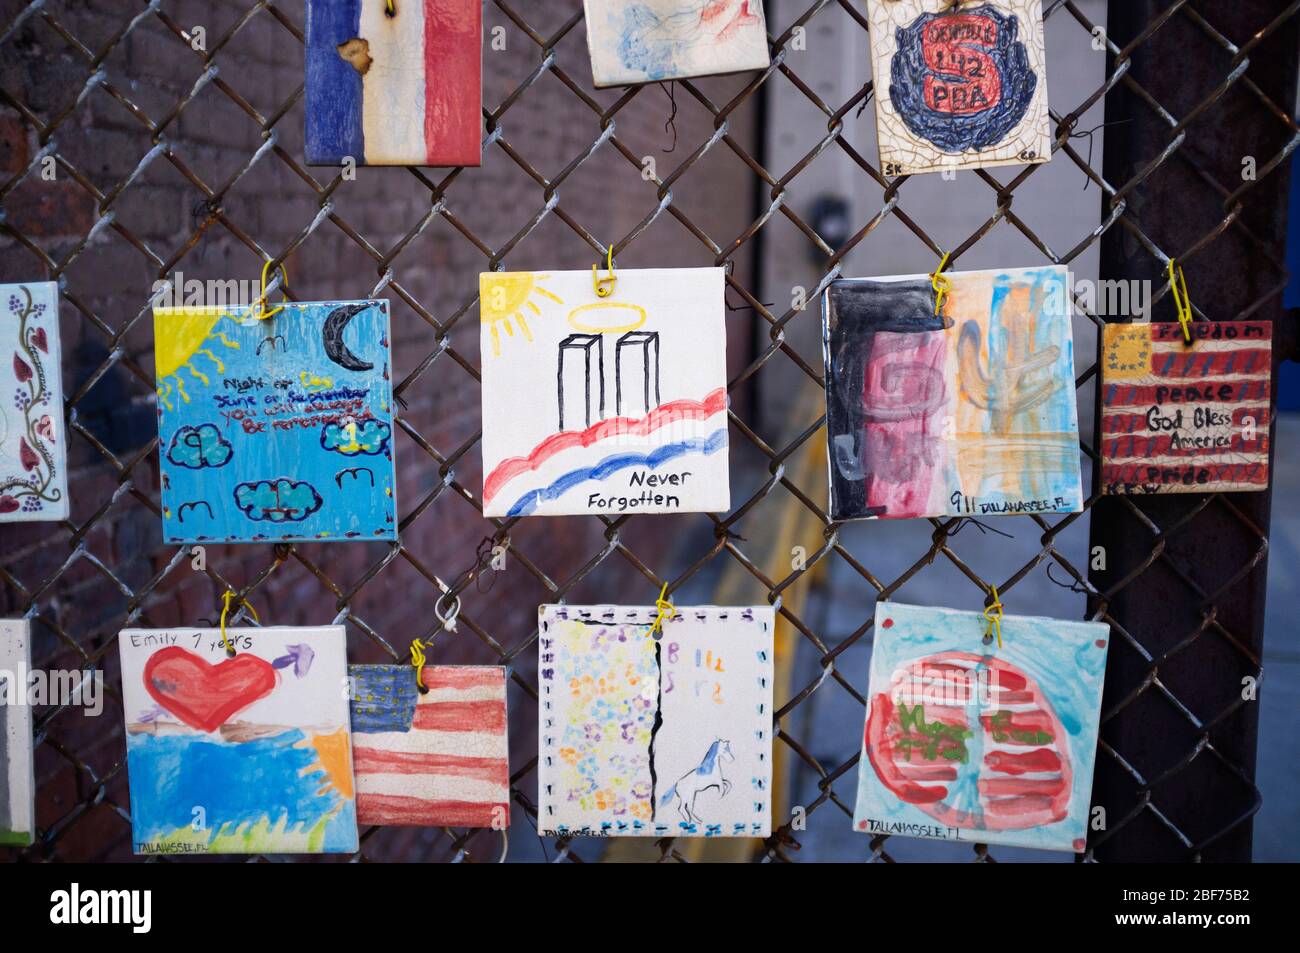 Tiles on a fence, New York. To remember 9/11, terror attack. Stock Photo